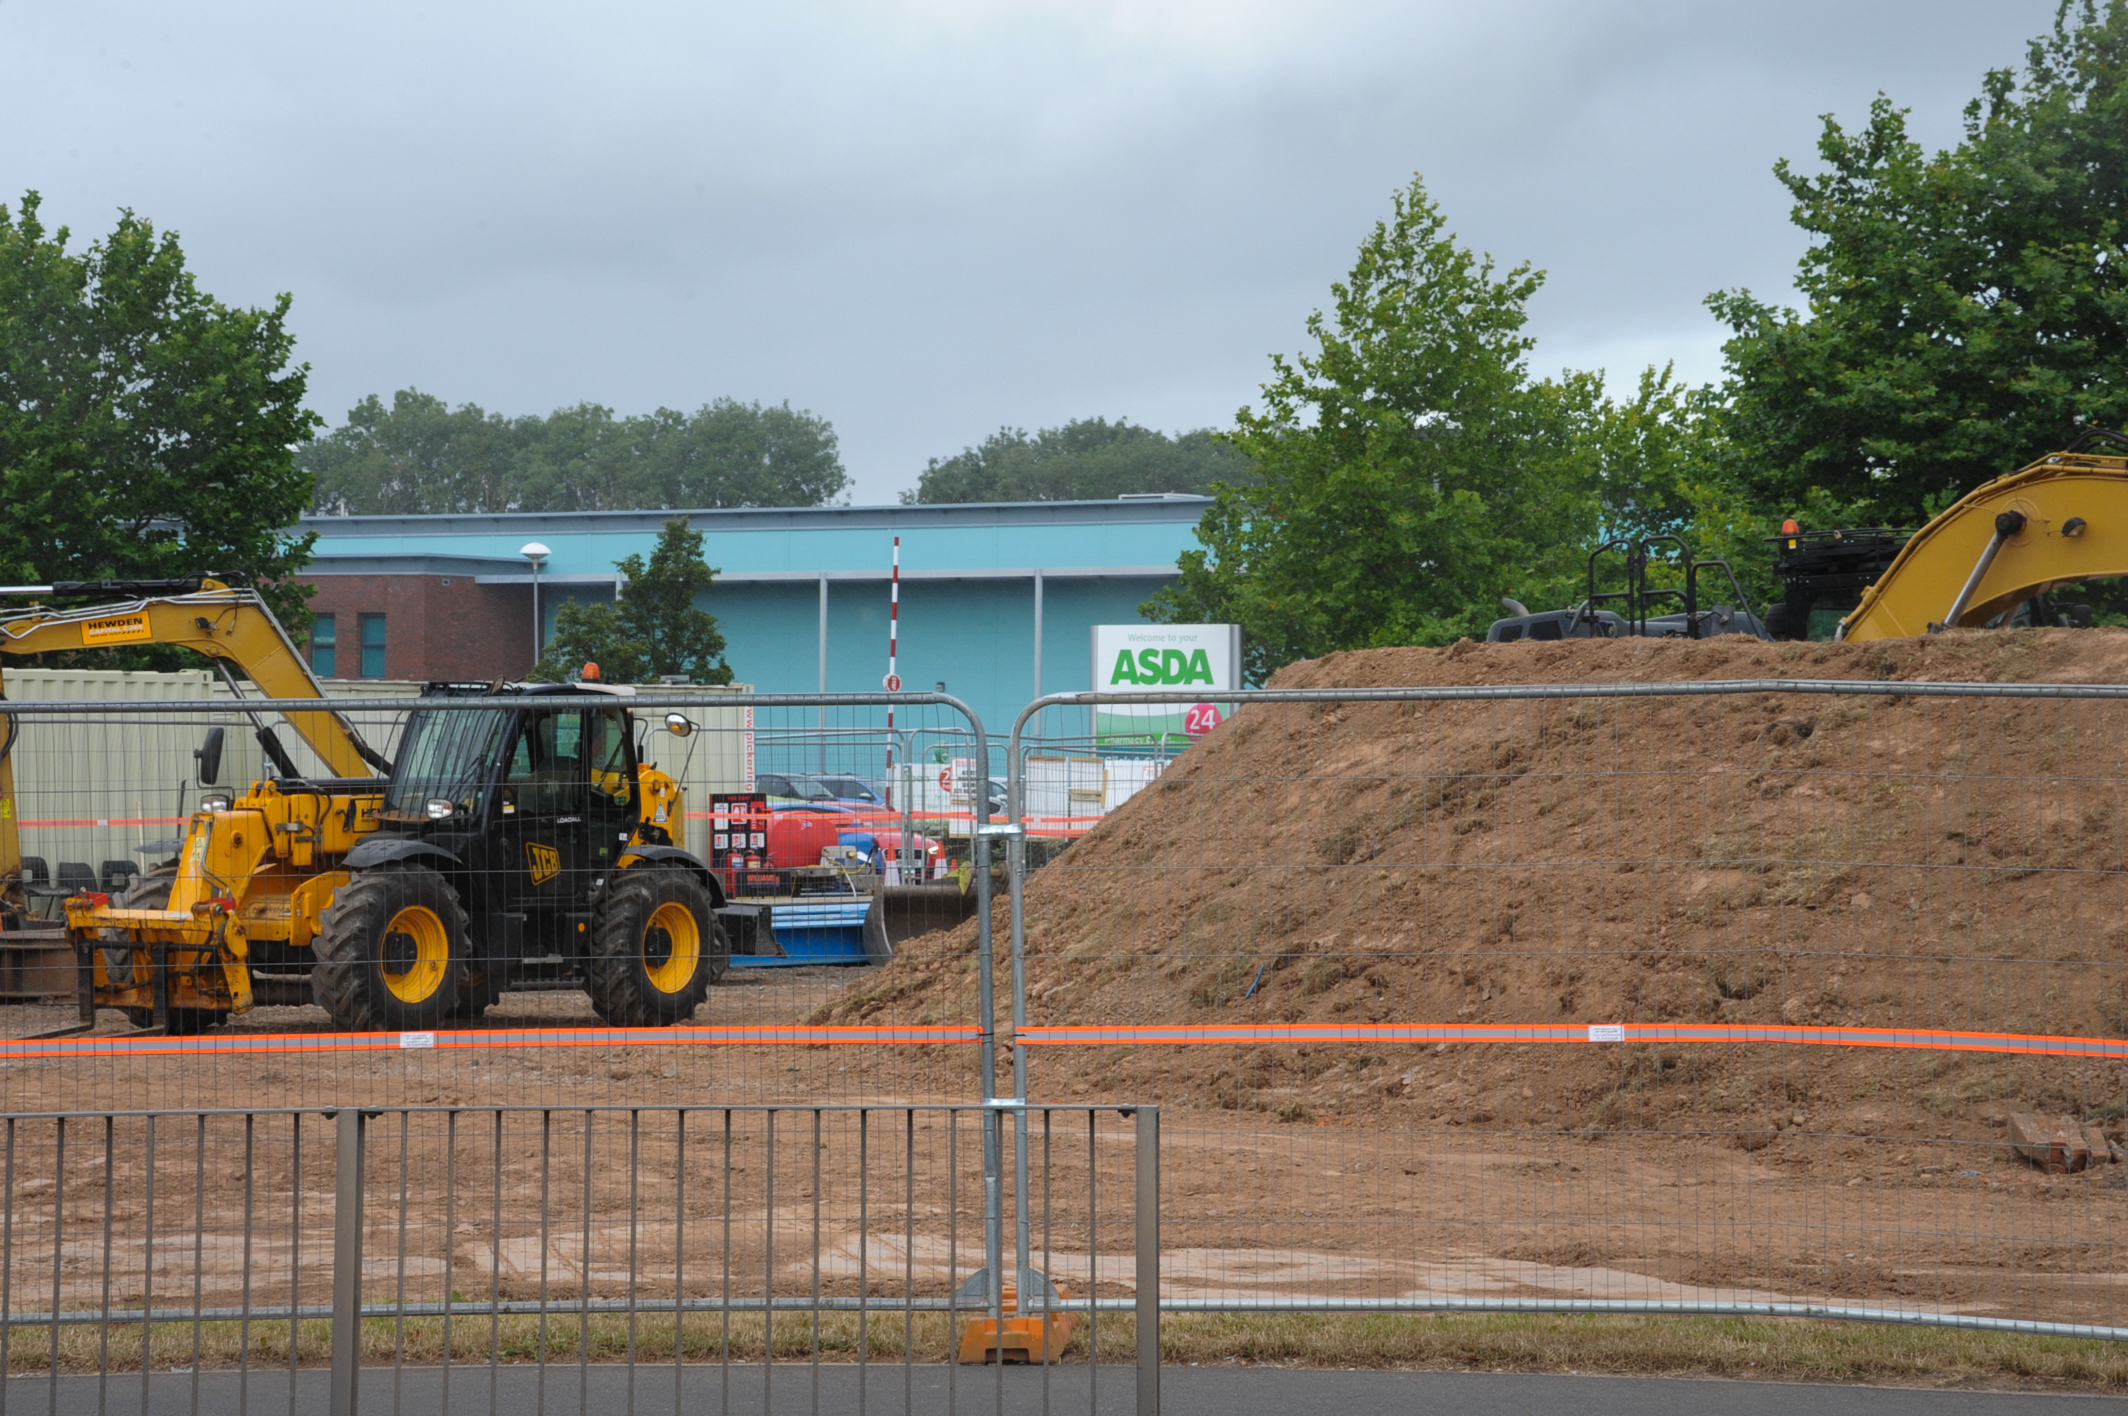 Building work started on Asdas Hereford petrol station in 2016 